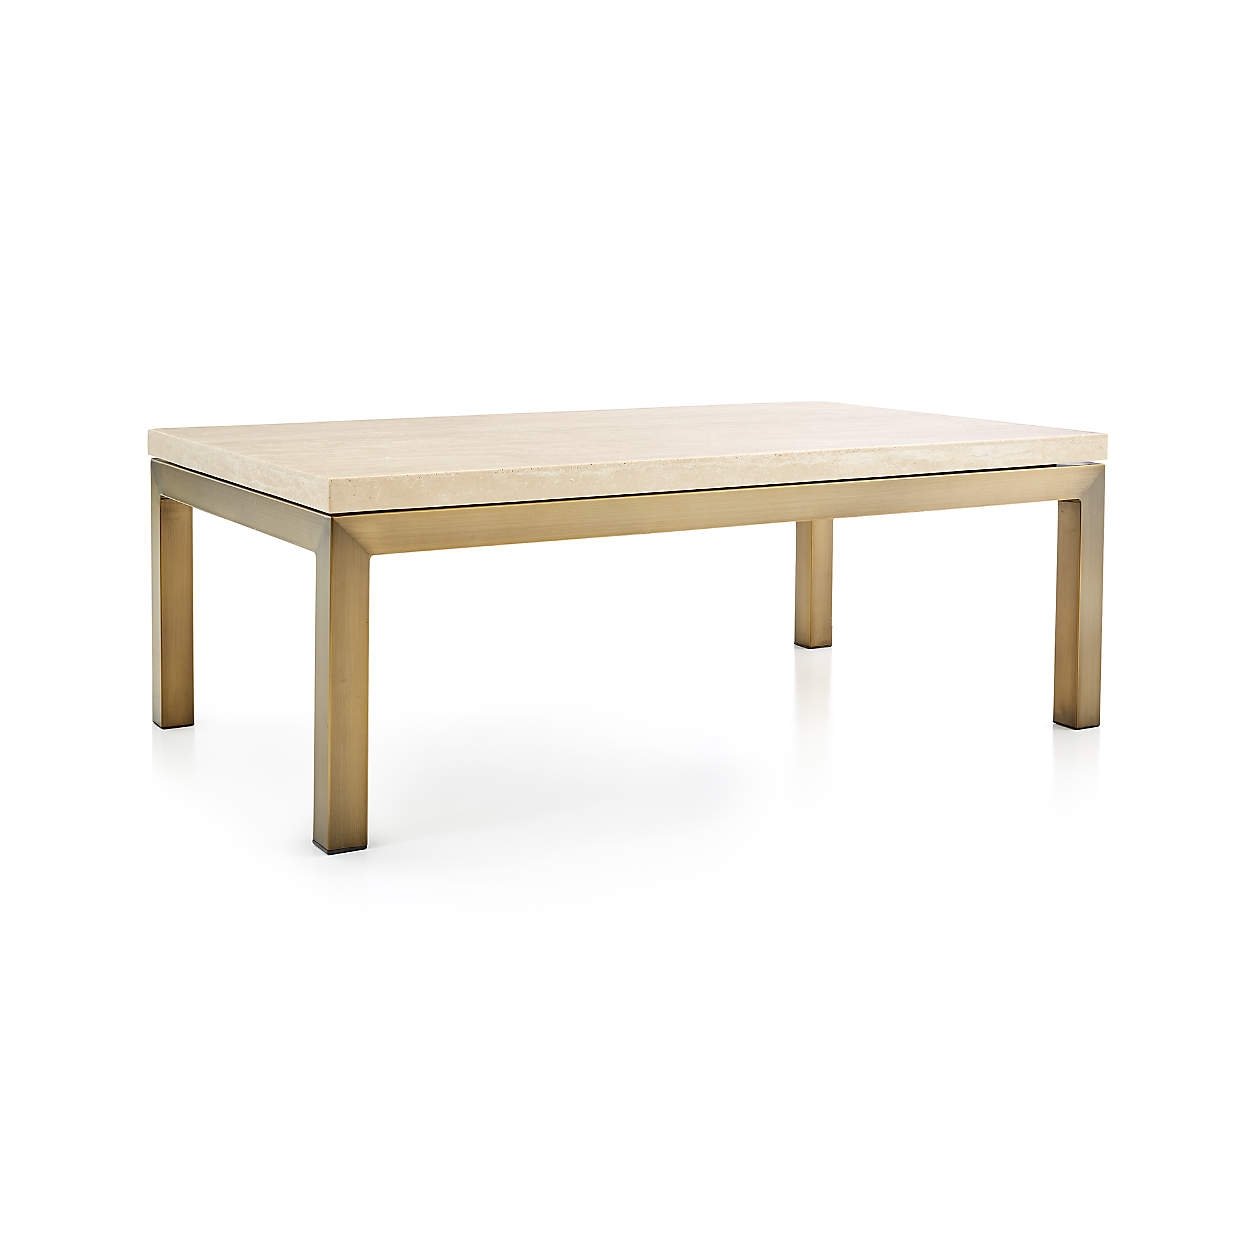 Parsons Travertine Top/ Brass Base 48x28 Small Rectangular Coffee Table - Image 1